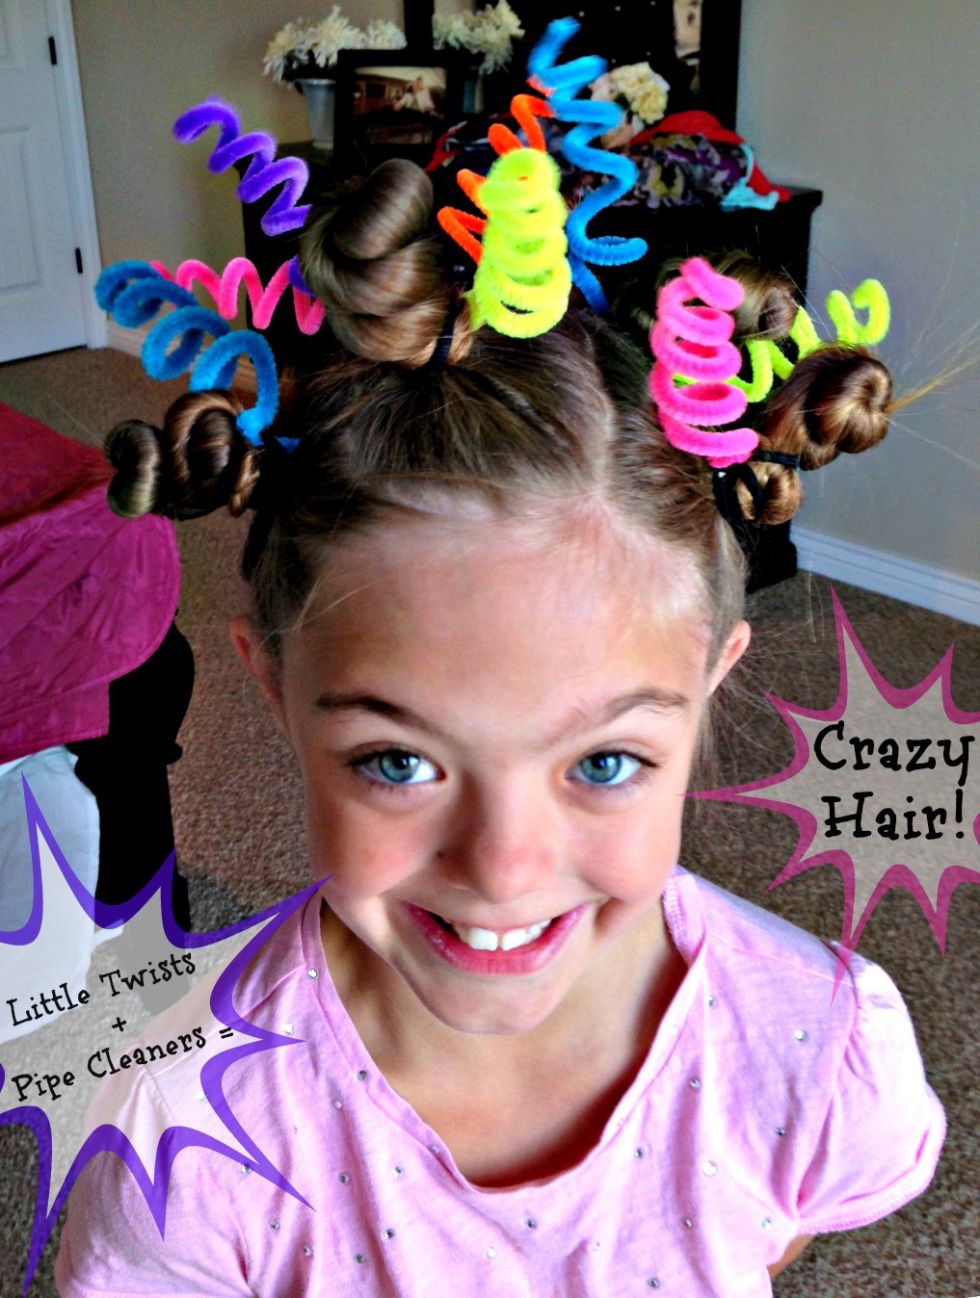 crazy hair day sign